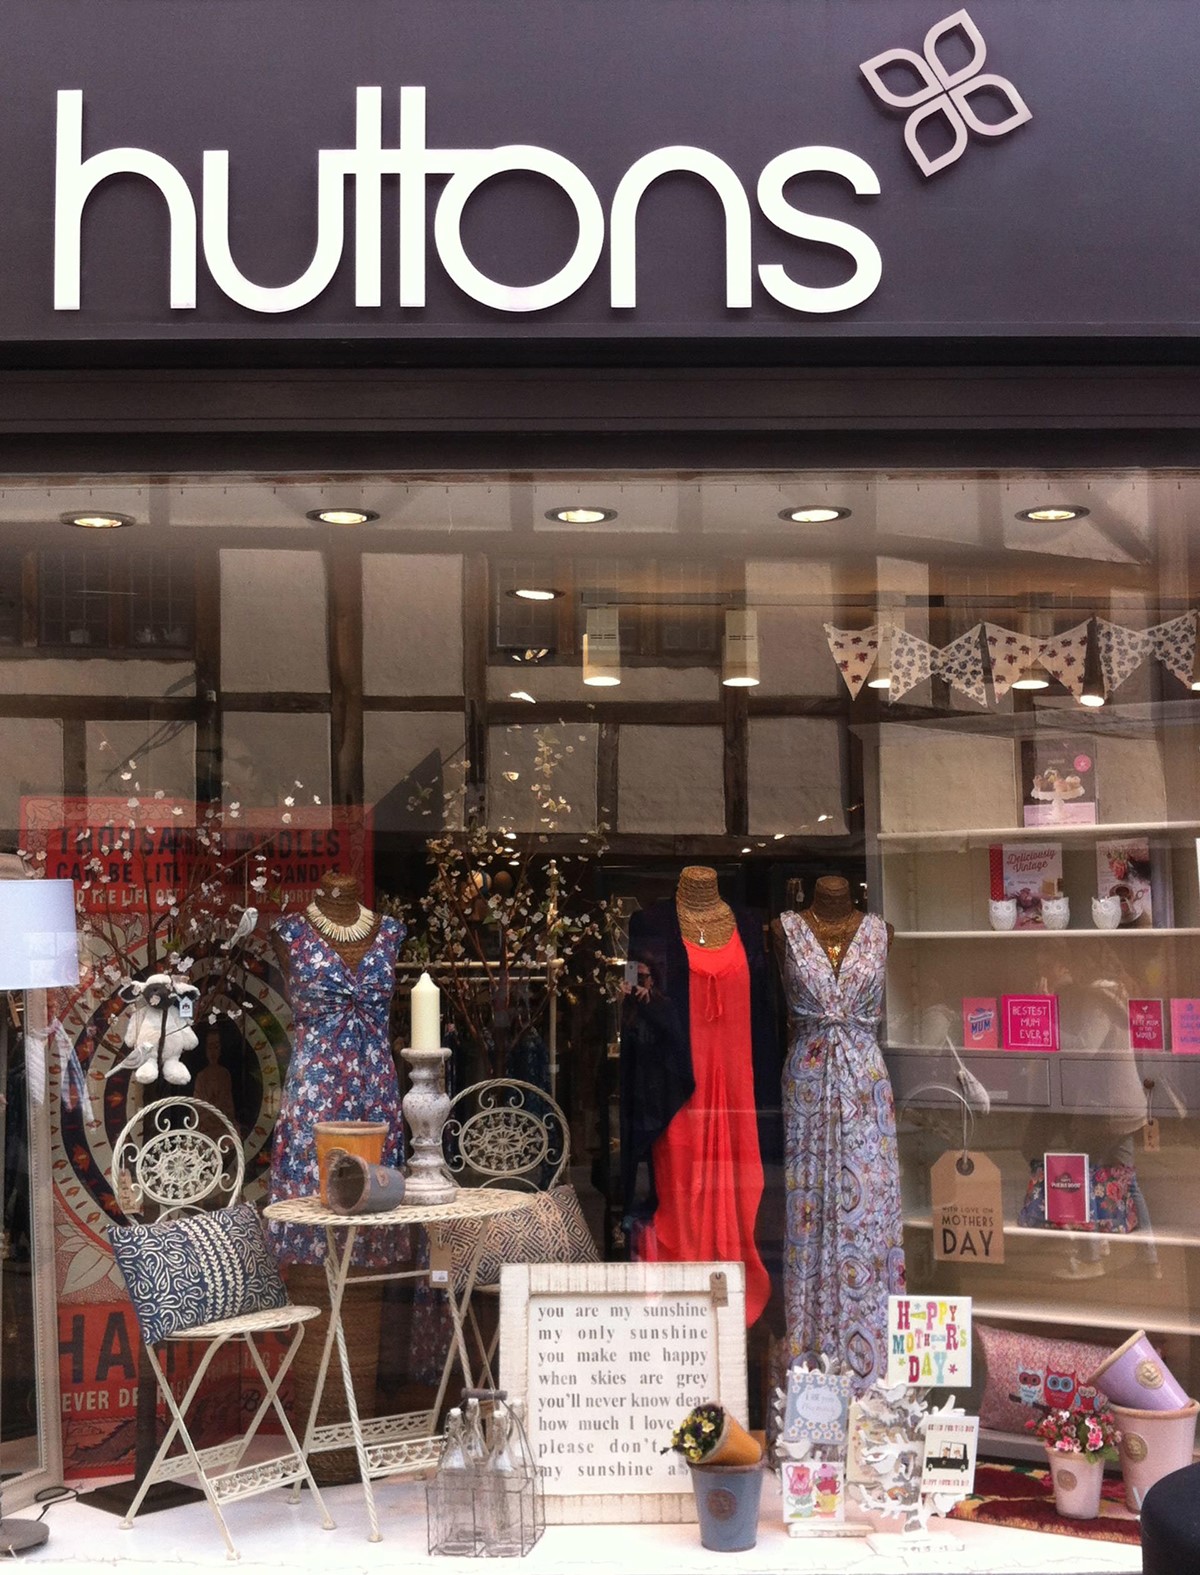 Huttons. Shopfront featuring new brand identity signage + palette. Design by Superfried. Manchester.